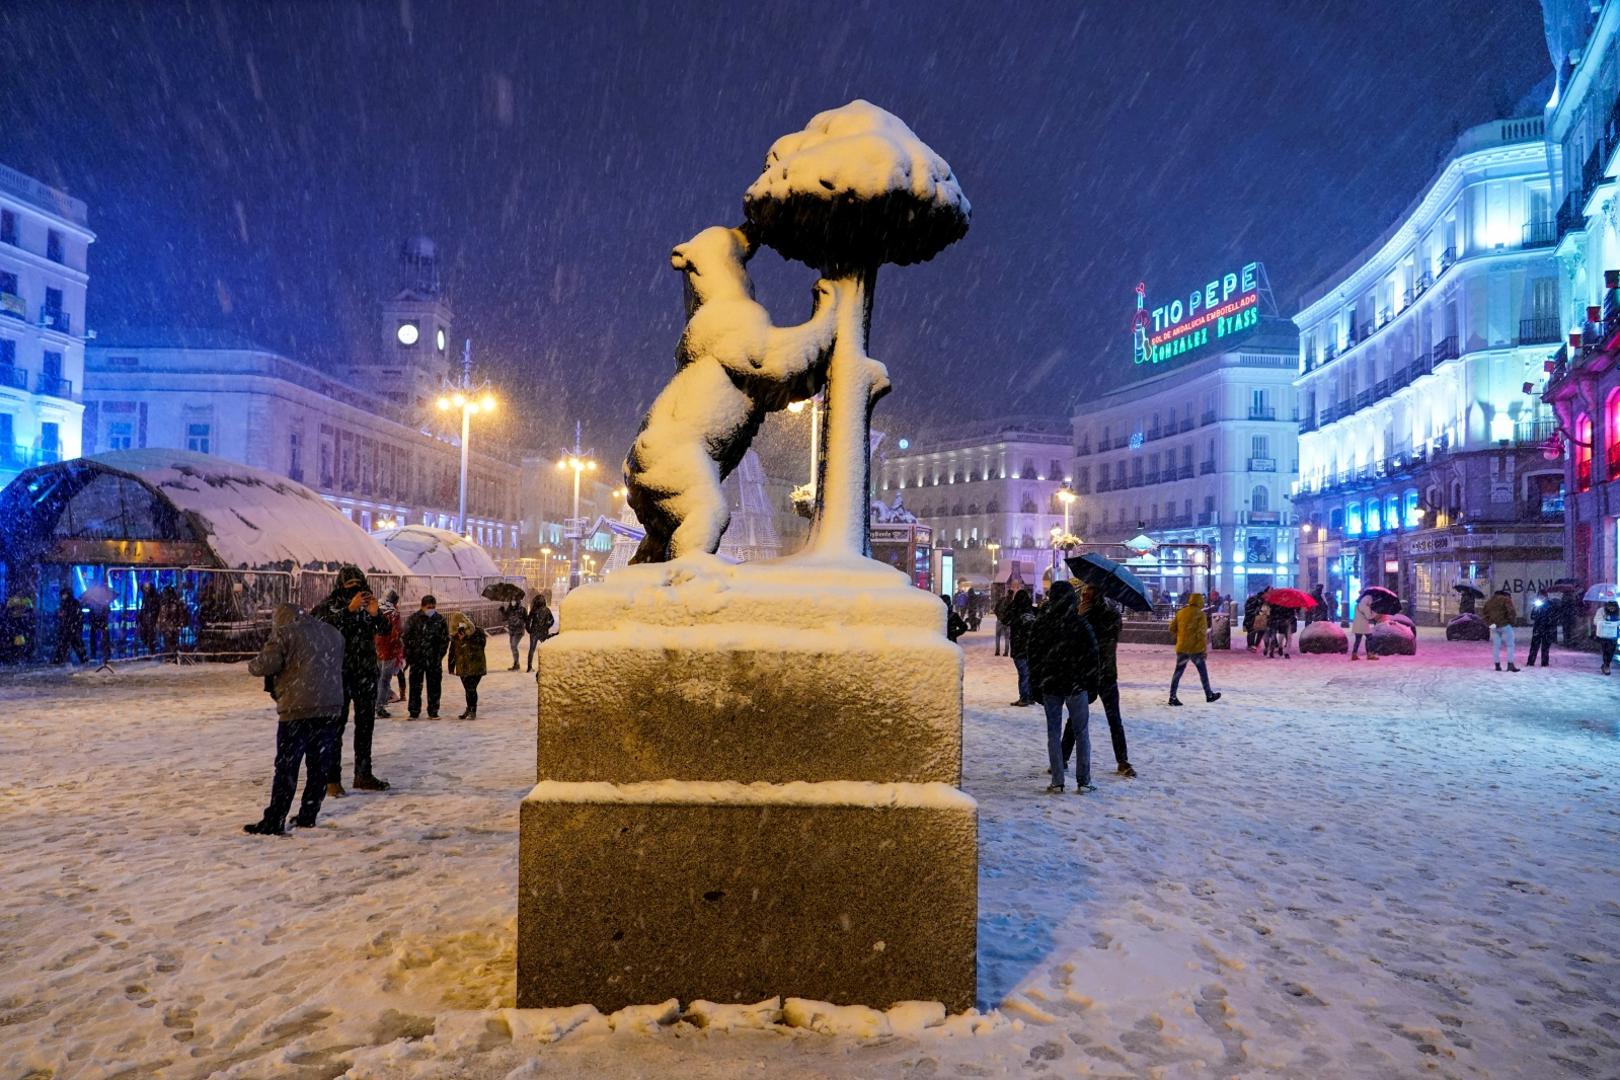 Snowfall in Madrid People walk by the snow-covered El Oso y El Madrono (The Bear and the Strawberry Tree) statue at Puerta del Sol square during snowfall in Madrid, Spain, January 8, 2021. REUTERS/Juan Medina JUAN MEDINA